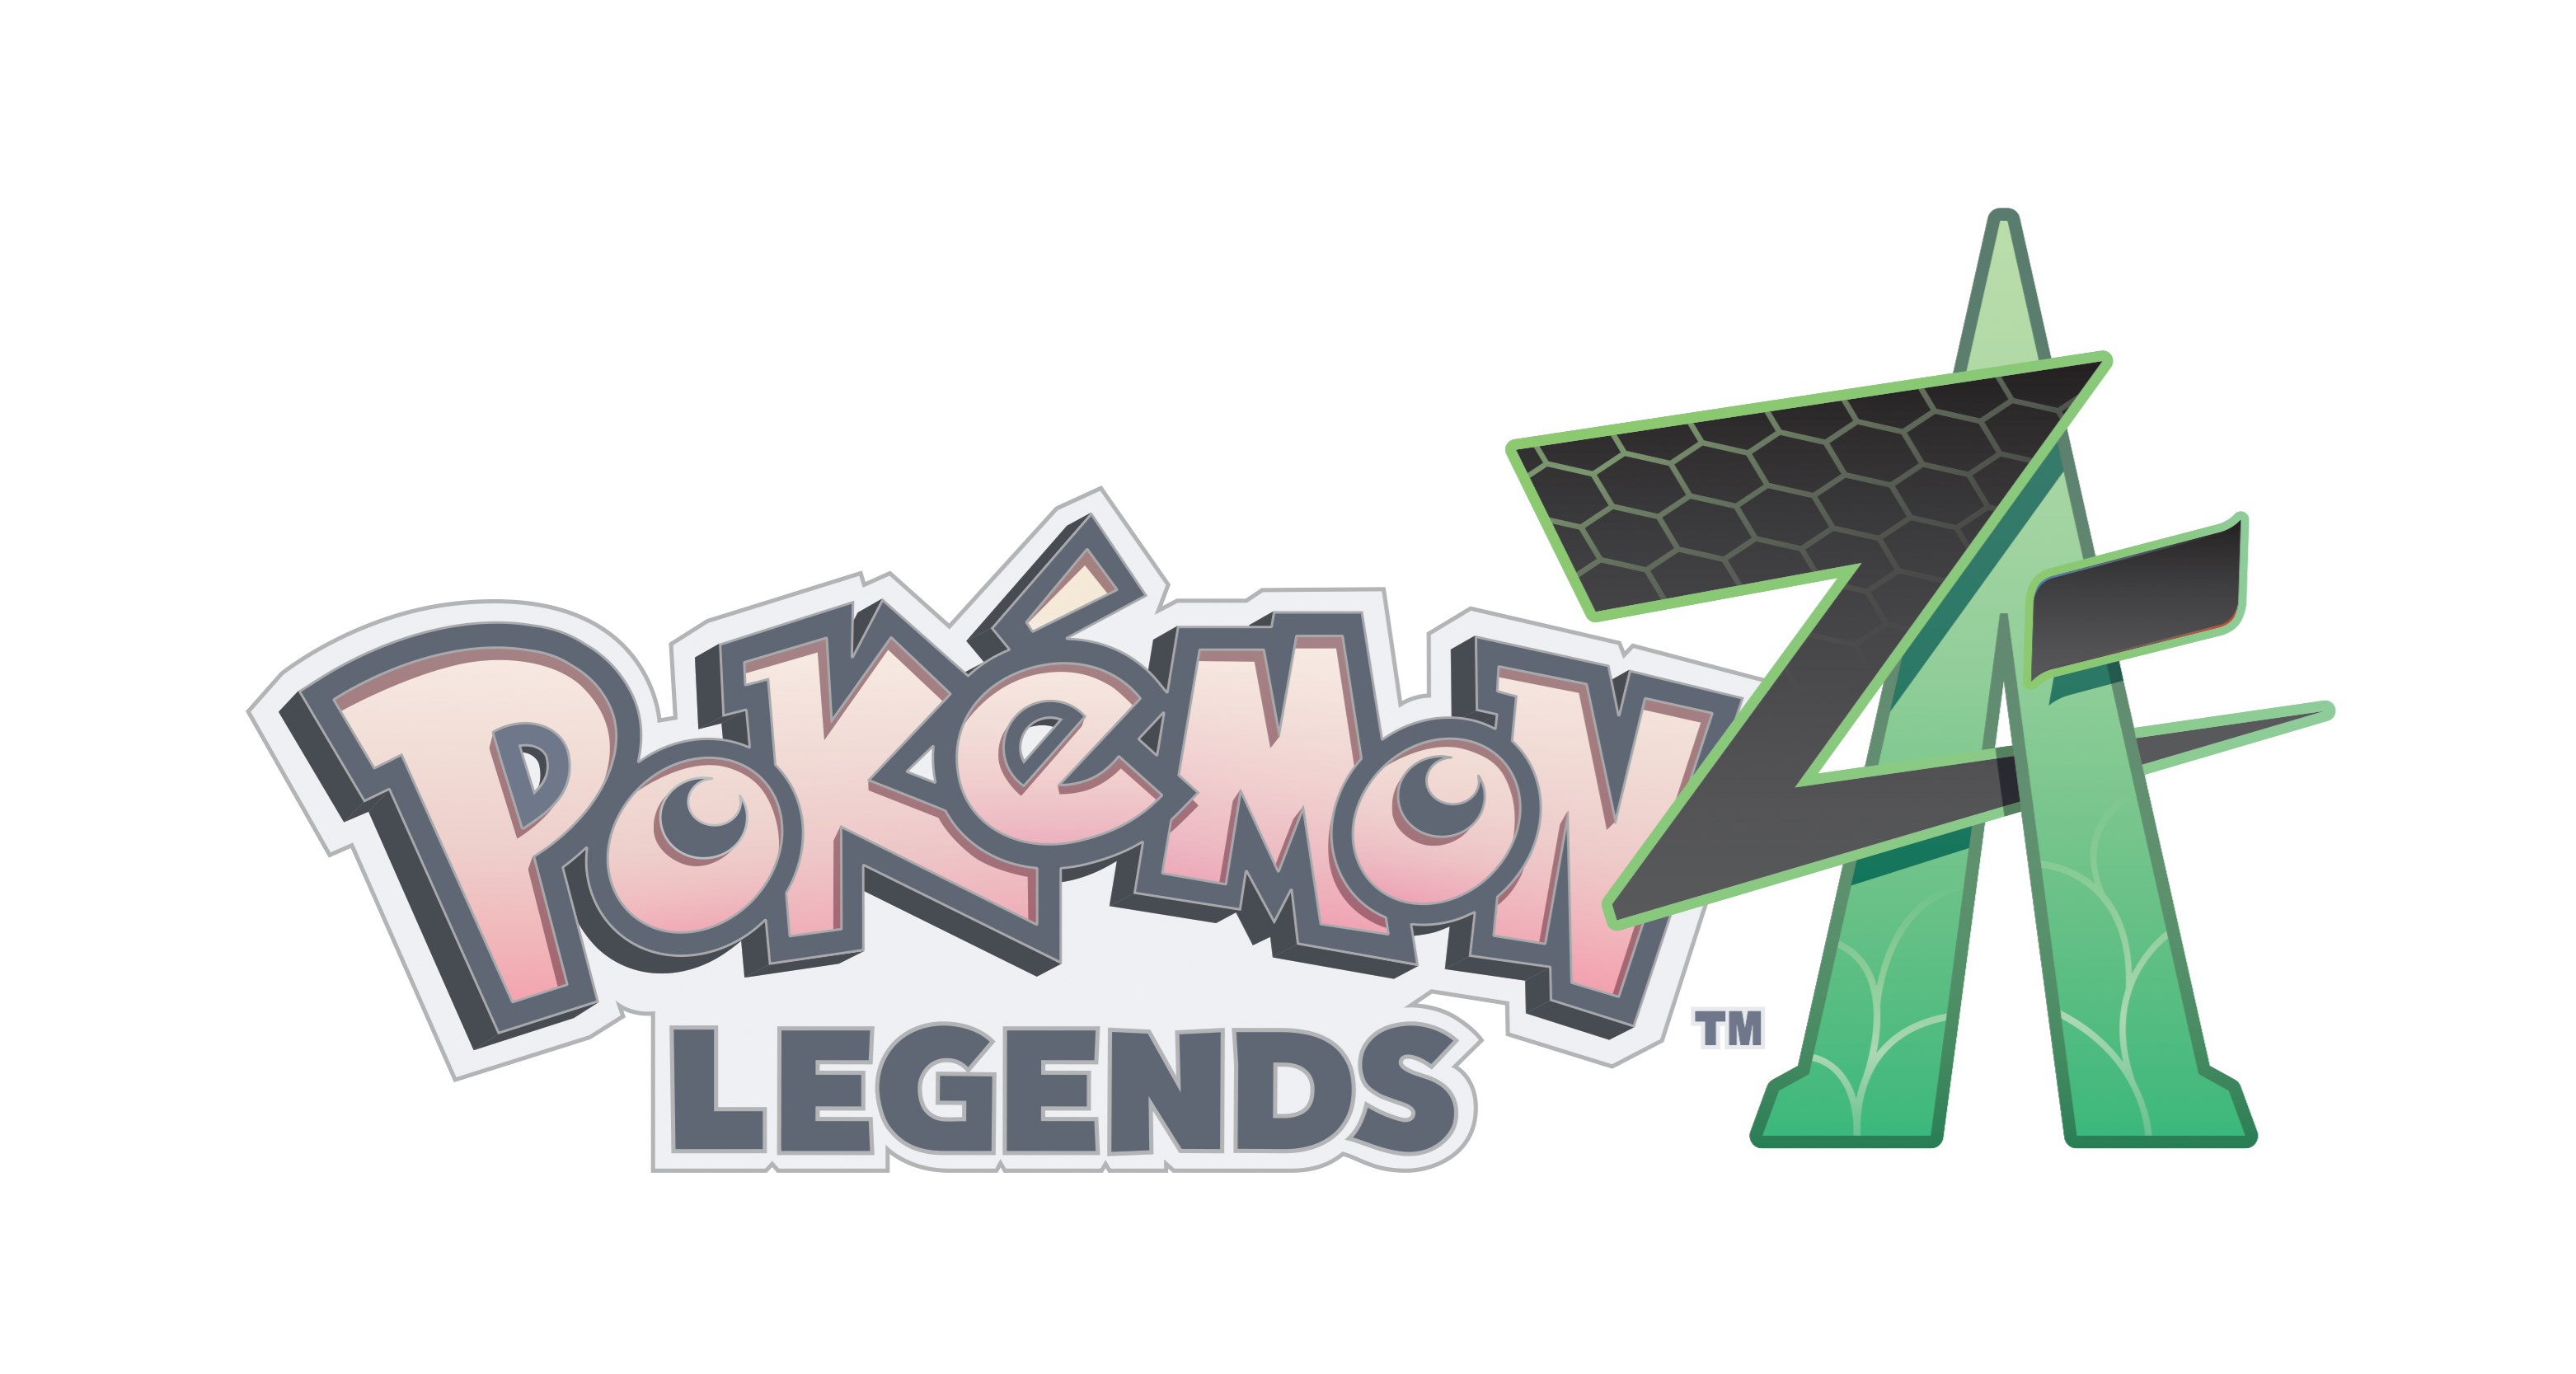 Pokémon ZA Legends – The game we didn’t know we needed